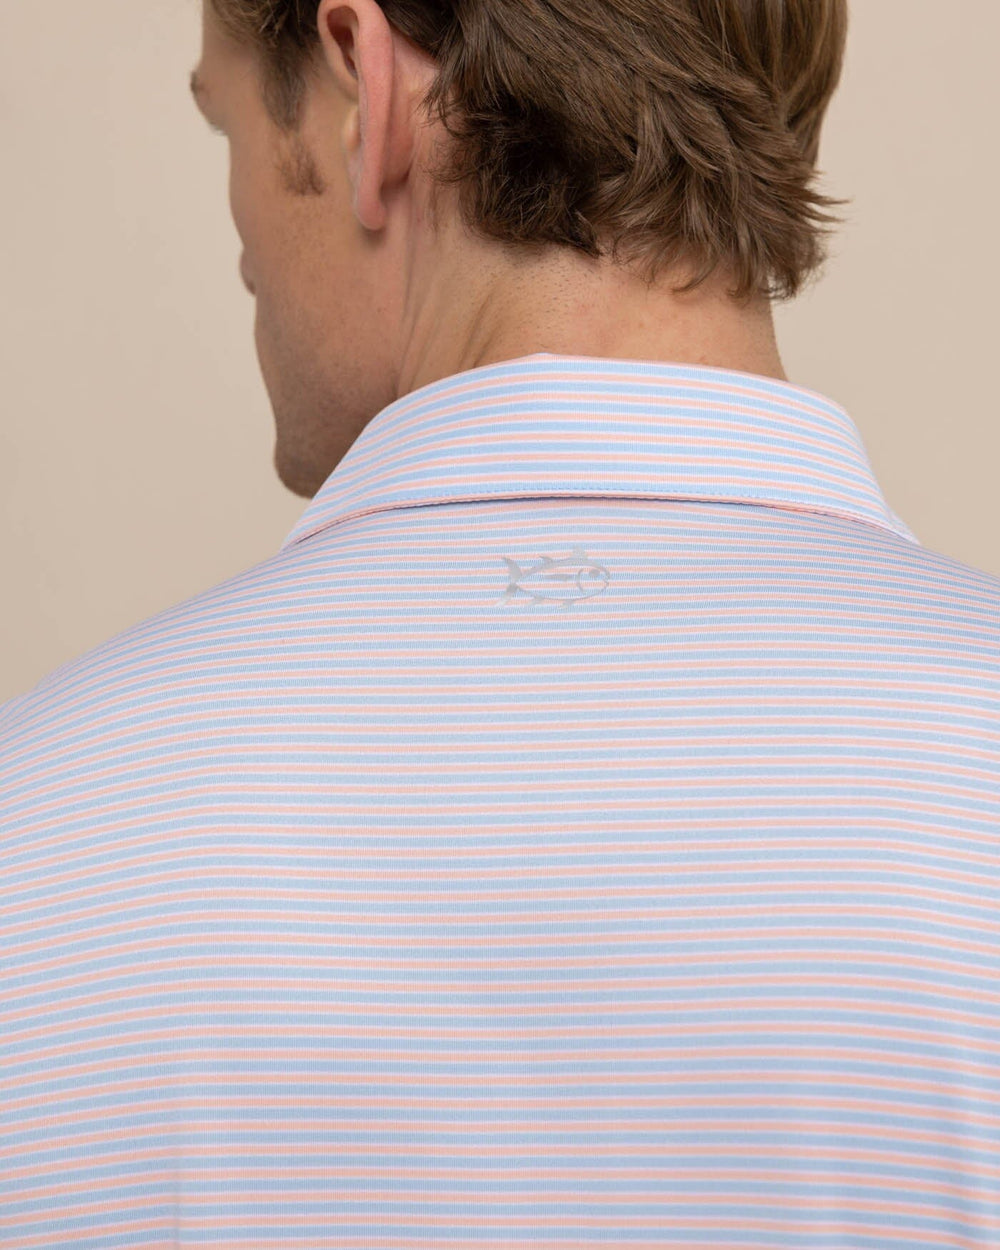 The detail view of the Southern Tide Driver Verdae Stripe Polo by Southern Tide - Apricot Blush Coral